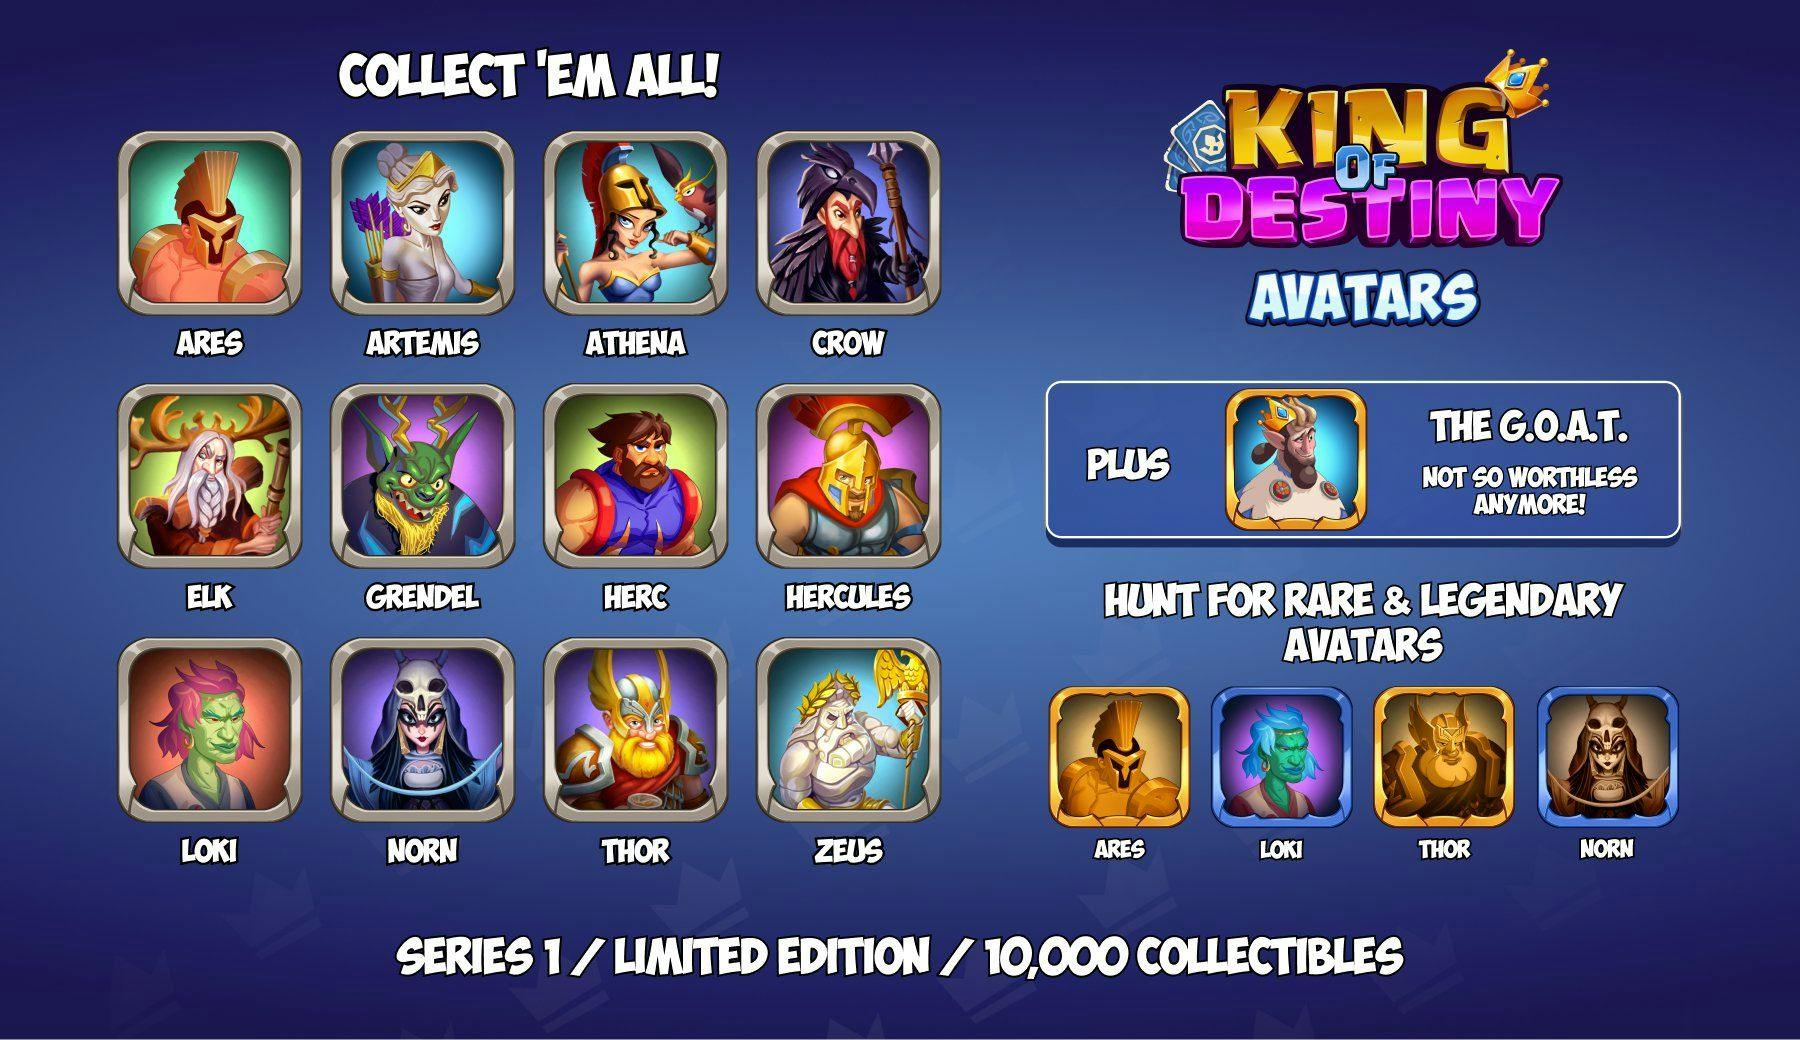 king of destiny collectibles.jpg